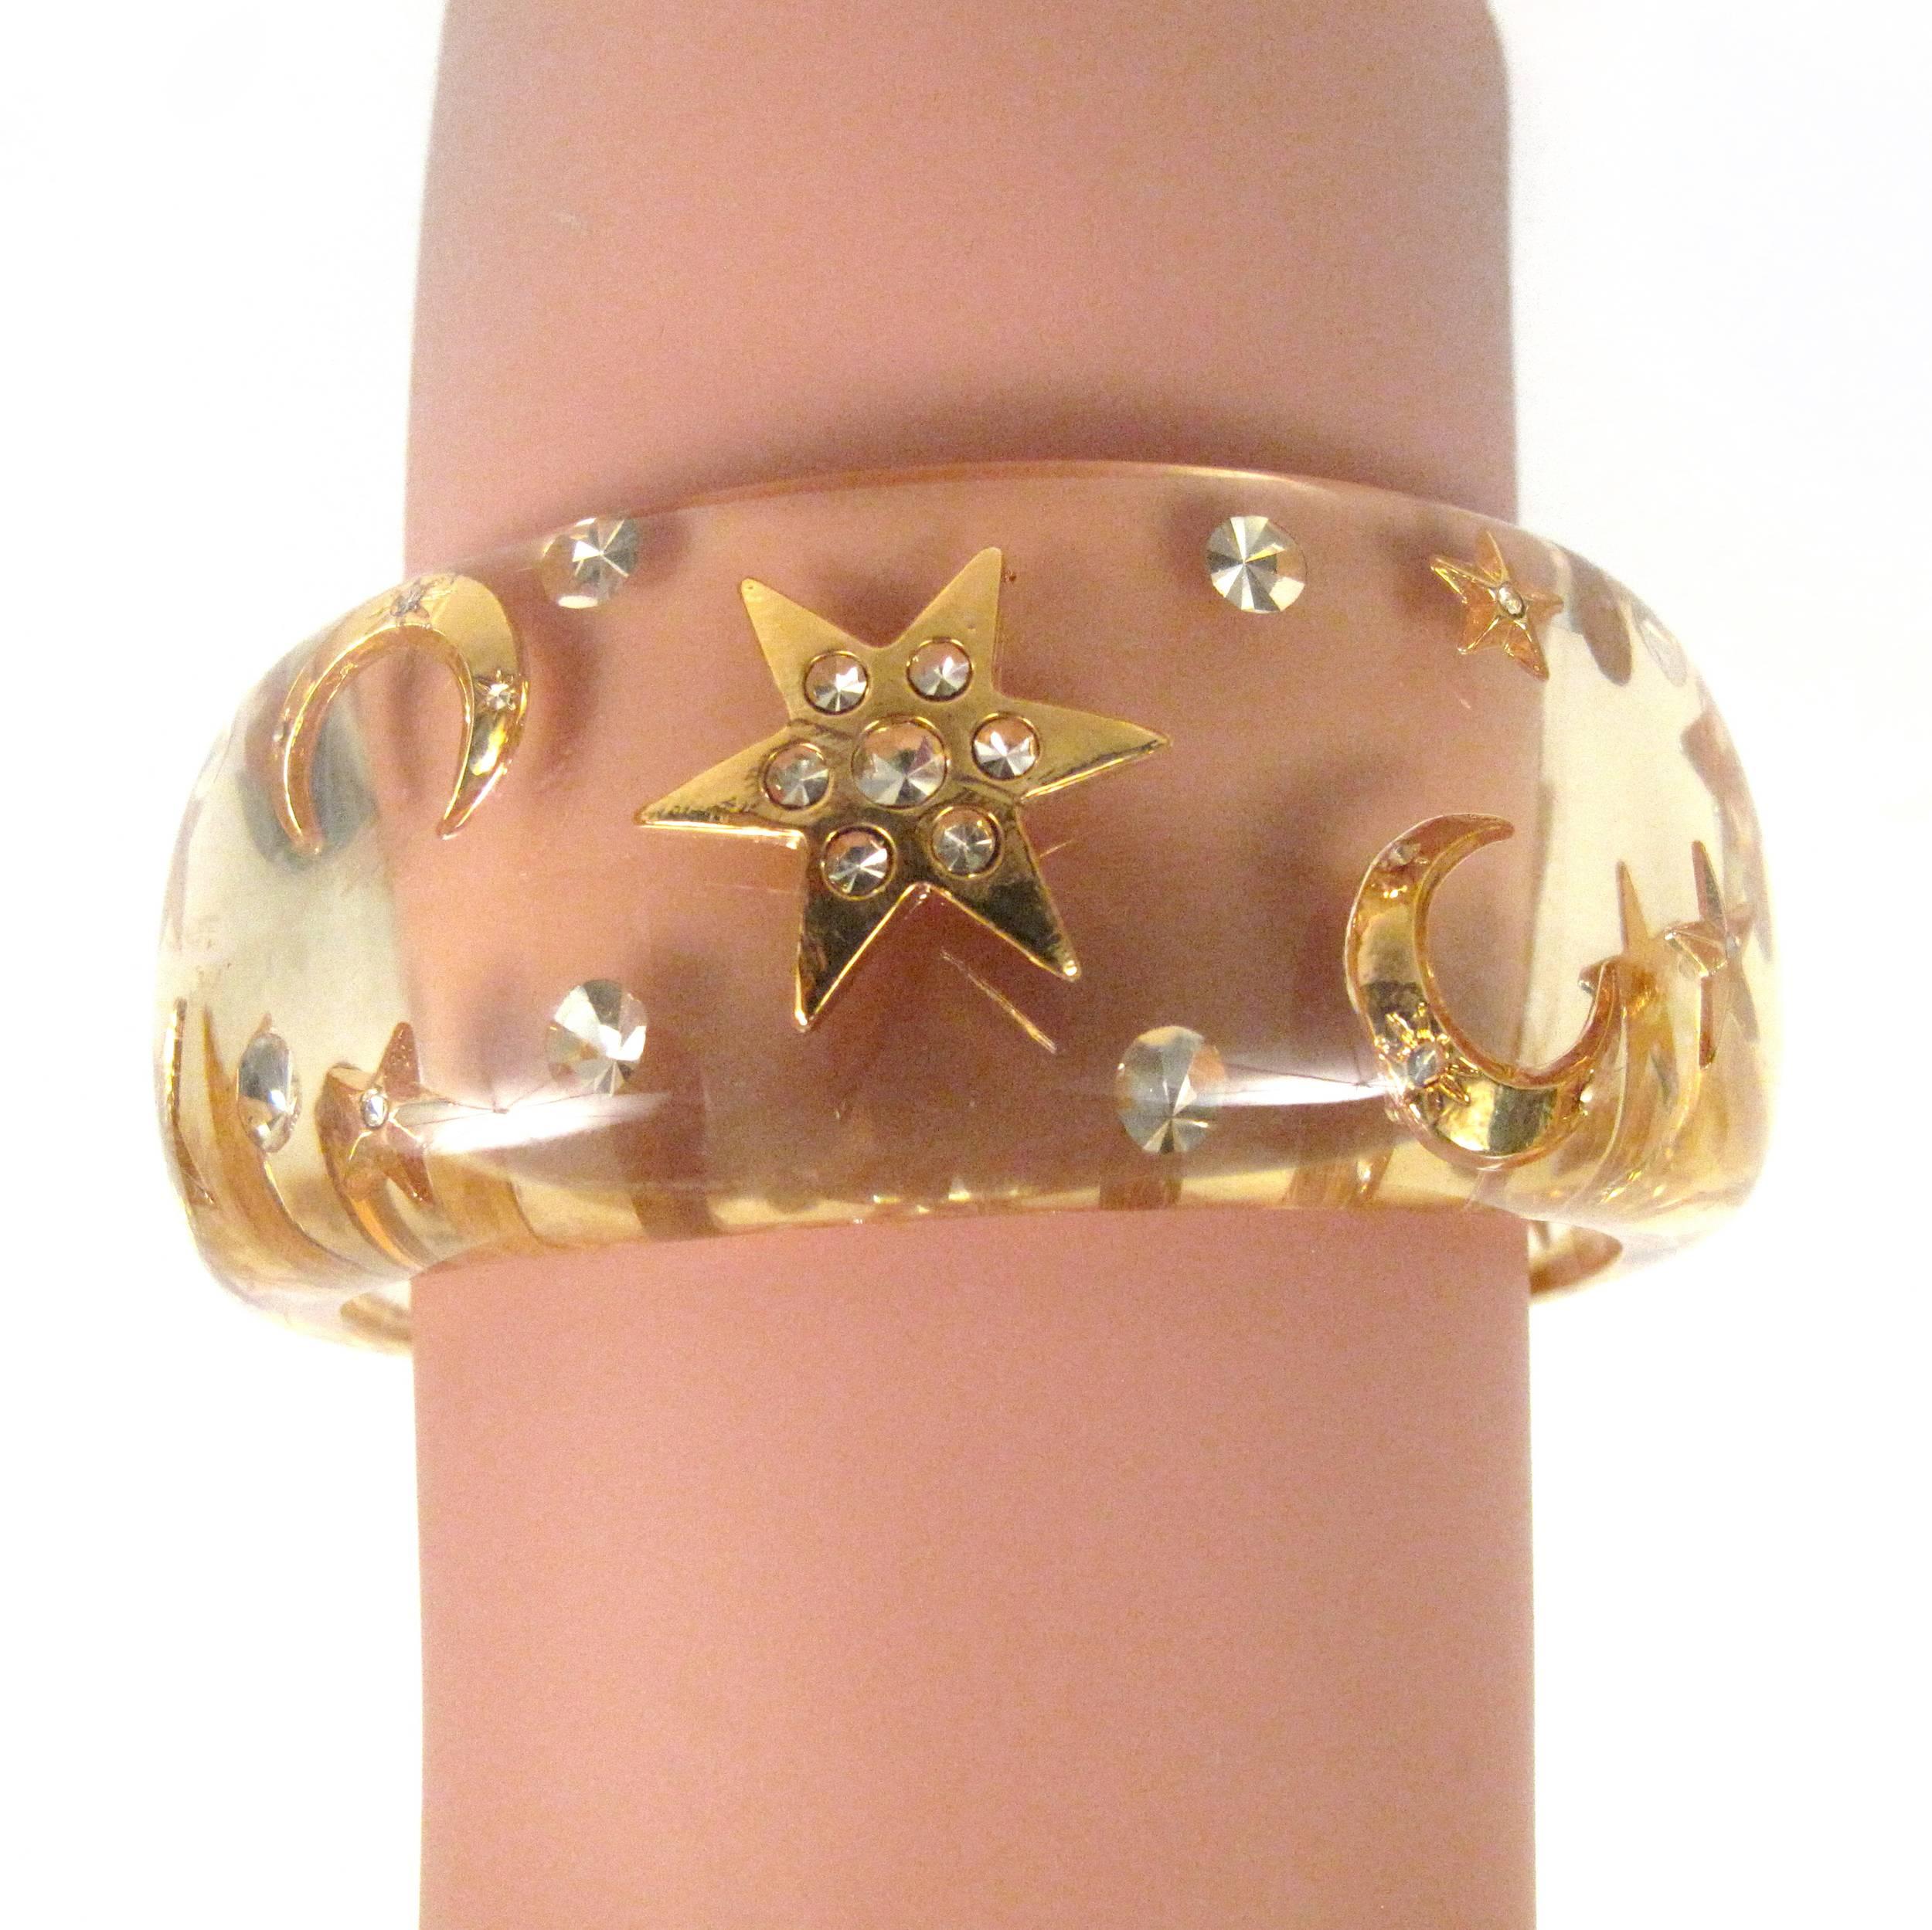 Chanel - Vintage Cuff Bracelet

Color: Clear / Gold

------------------------------------------------------------
 
Details:

- gold tone metal

- cc logos throughout

- star & moon symbols throughout

- crystals embellishments